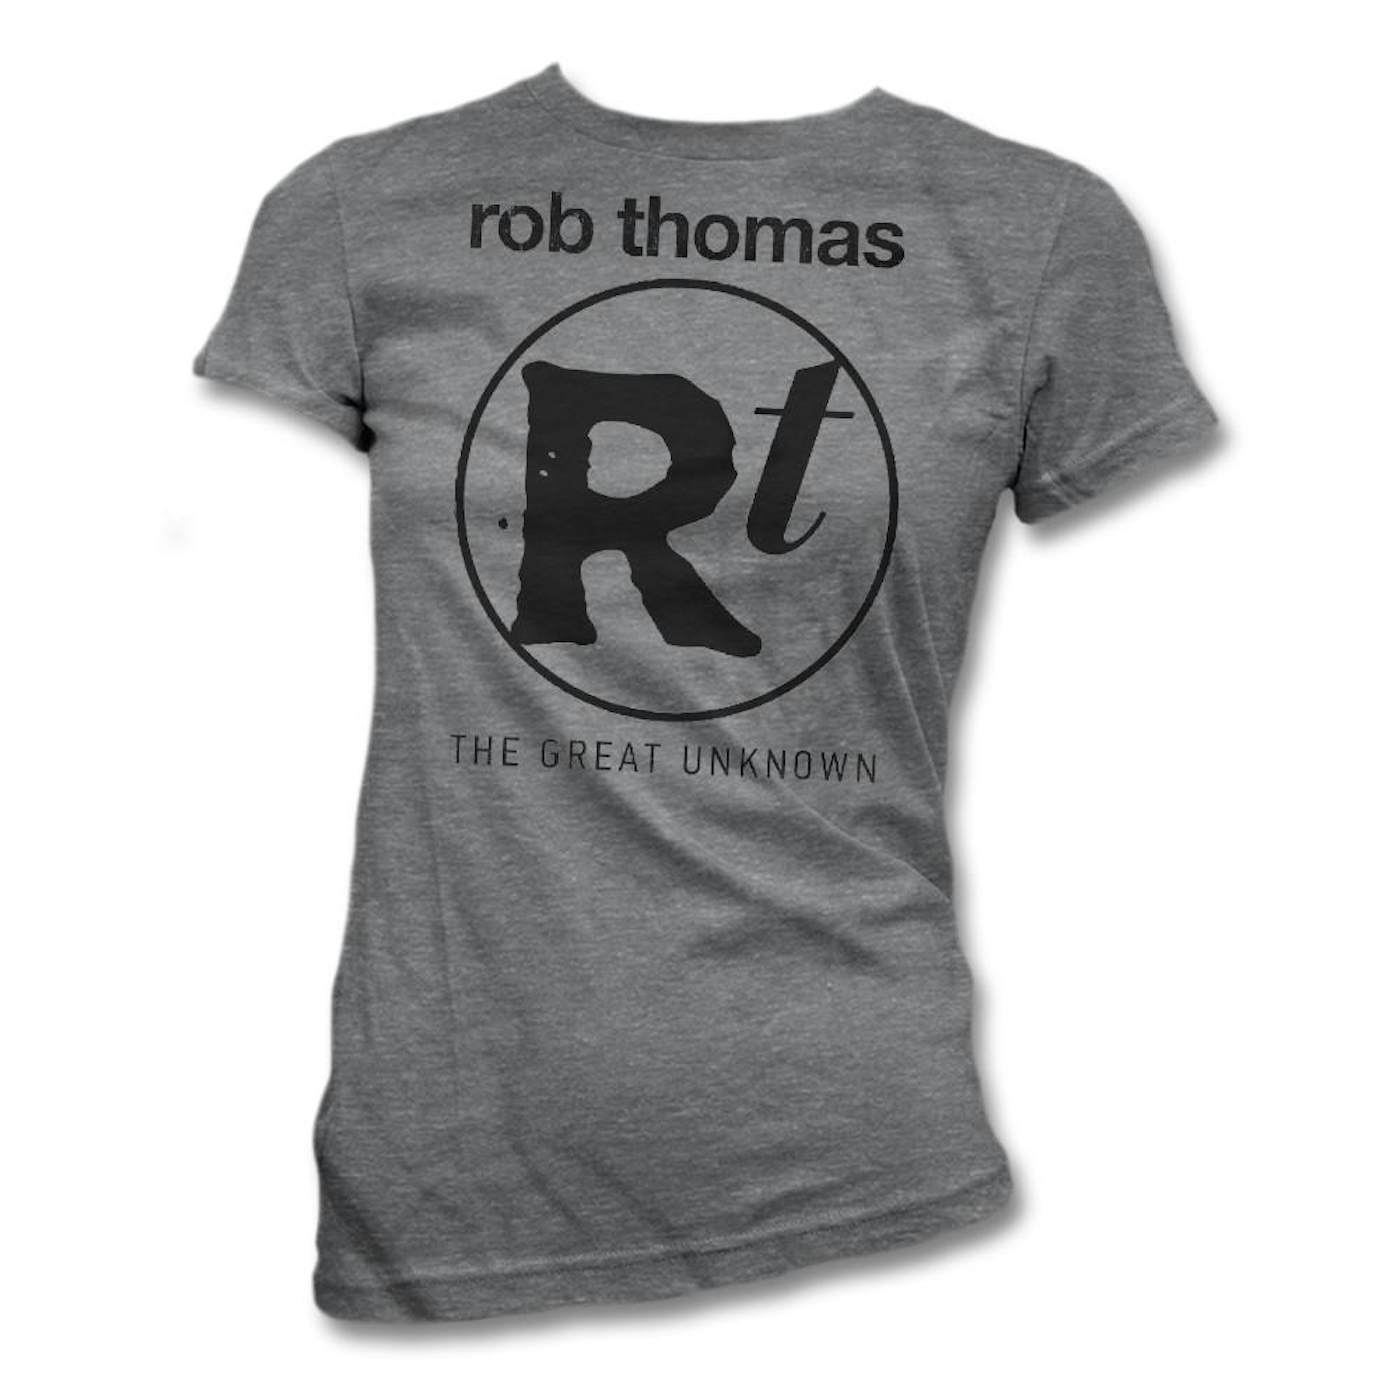 Rob Thomas The Great Unknown T-shirt - Women's